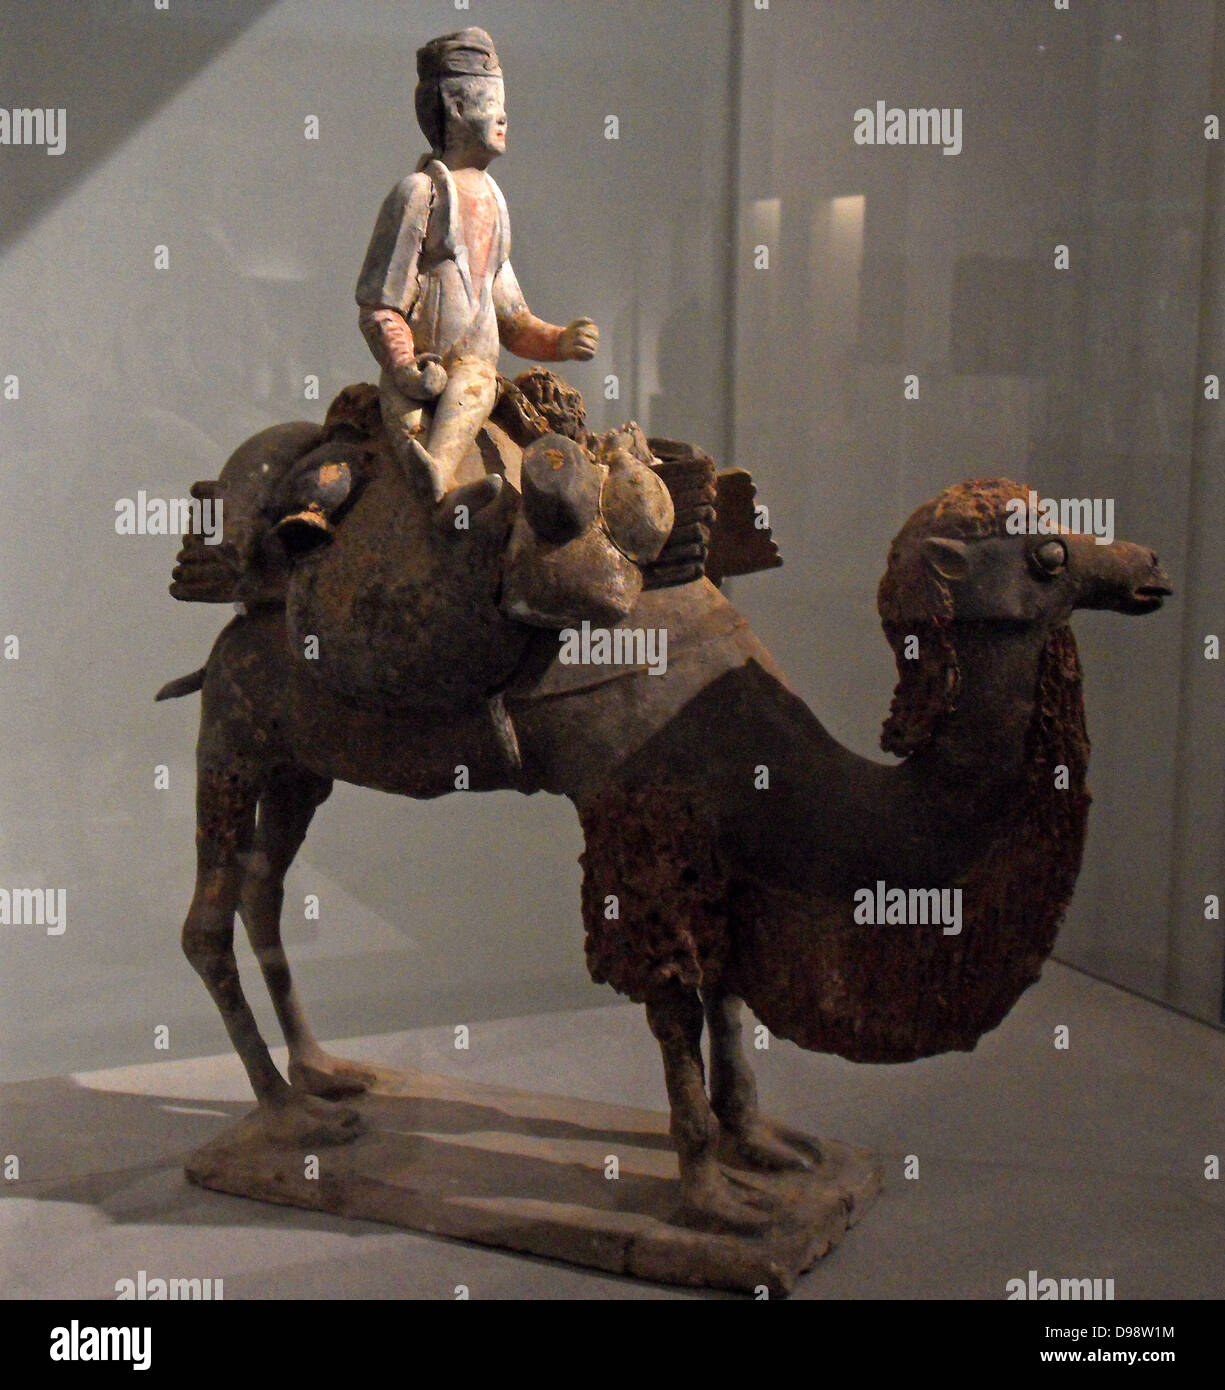 Chinese figurine of a Bactrian Camel with rider. Sui dynasty (581-618 AD), Tang dynasty (618-907 AD) polychrome terracotta. Stock Photo